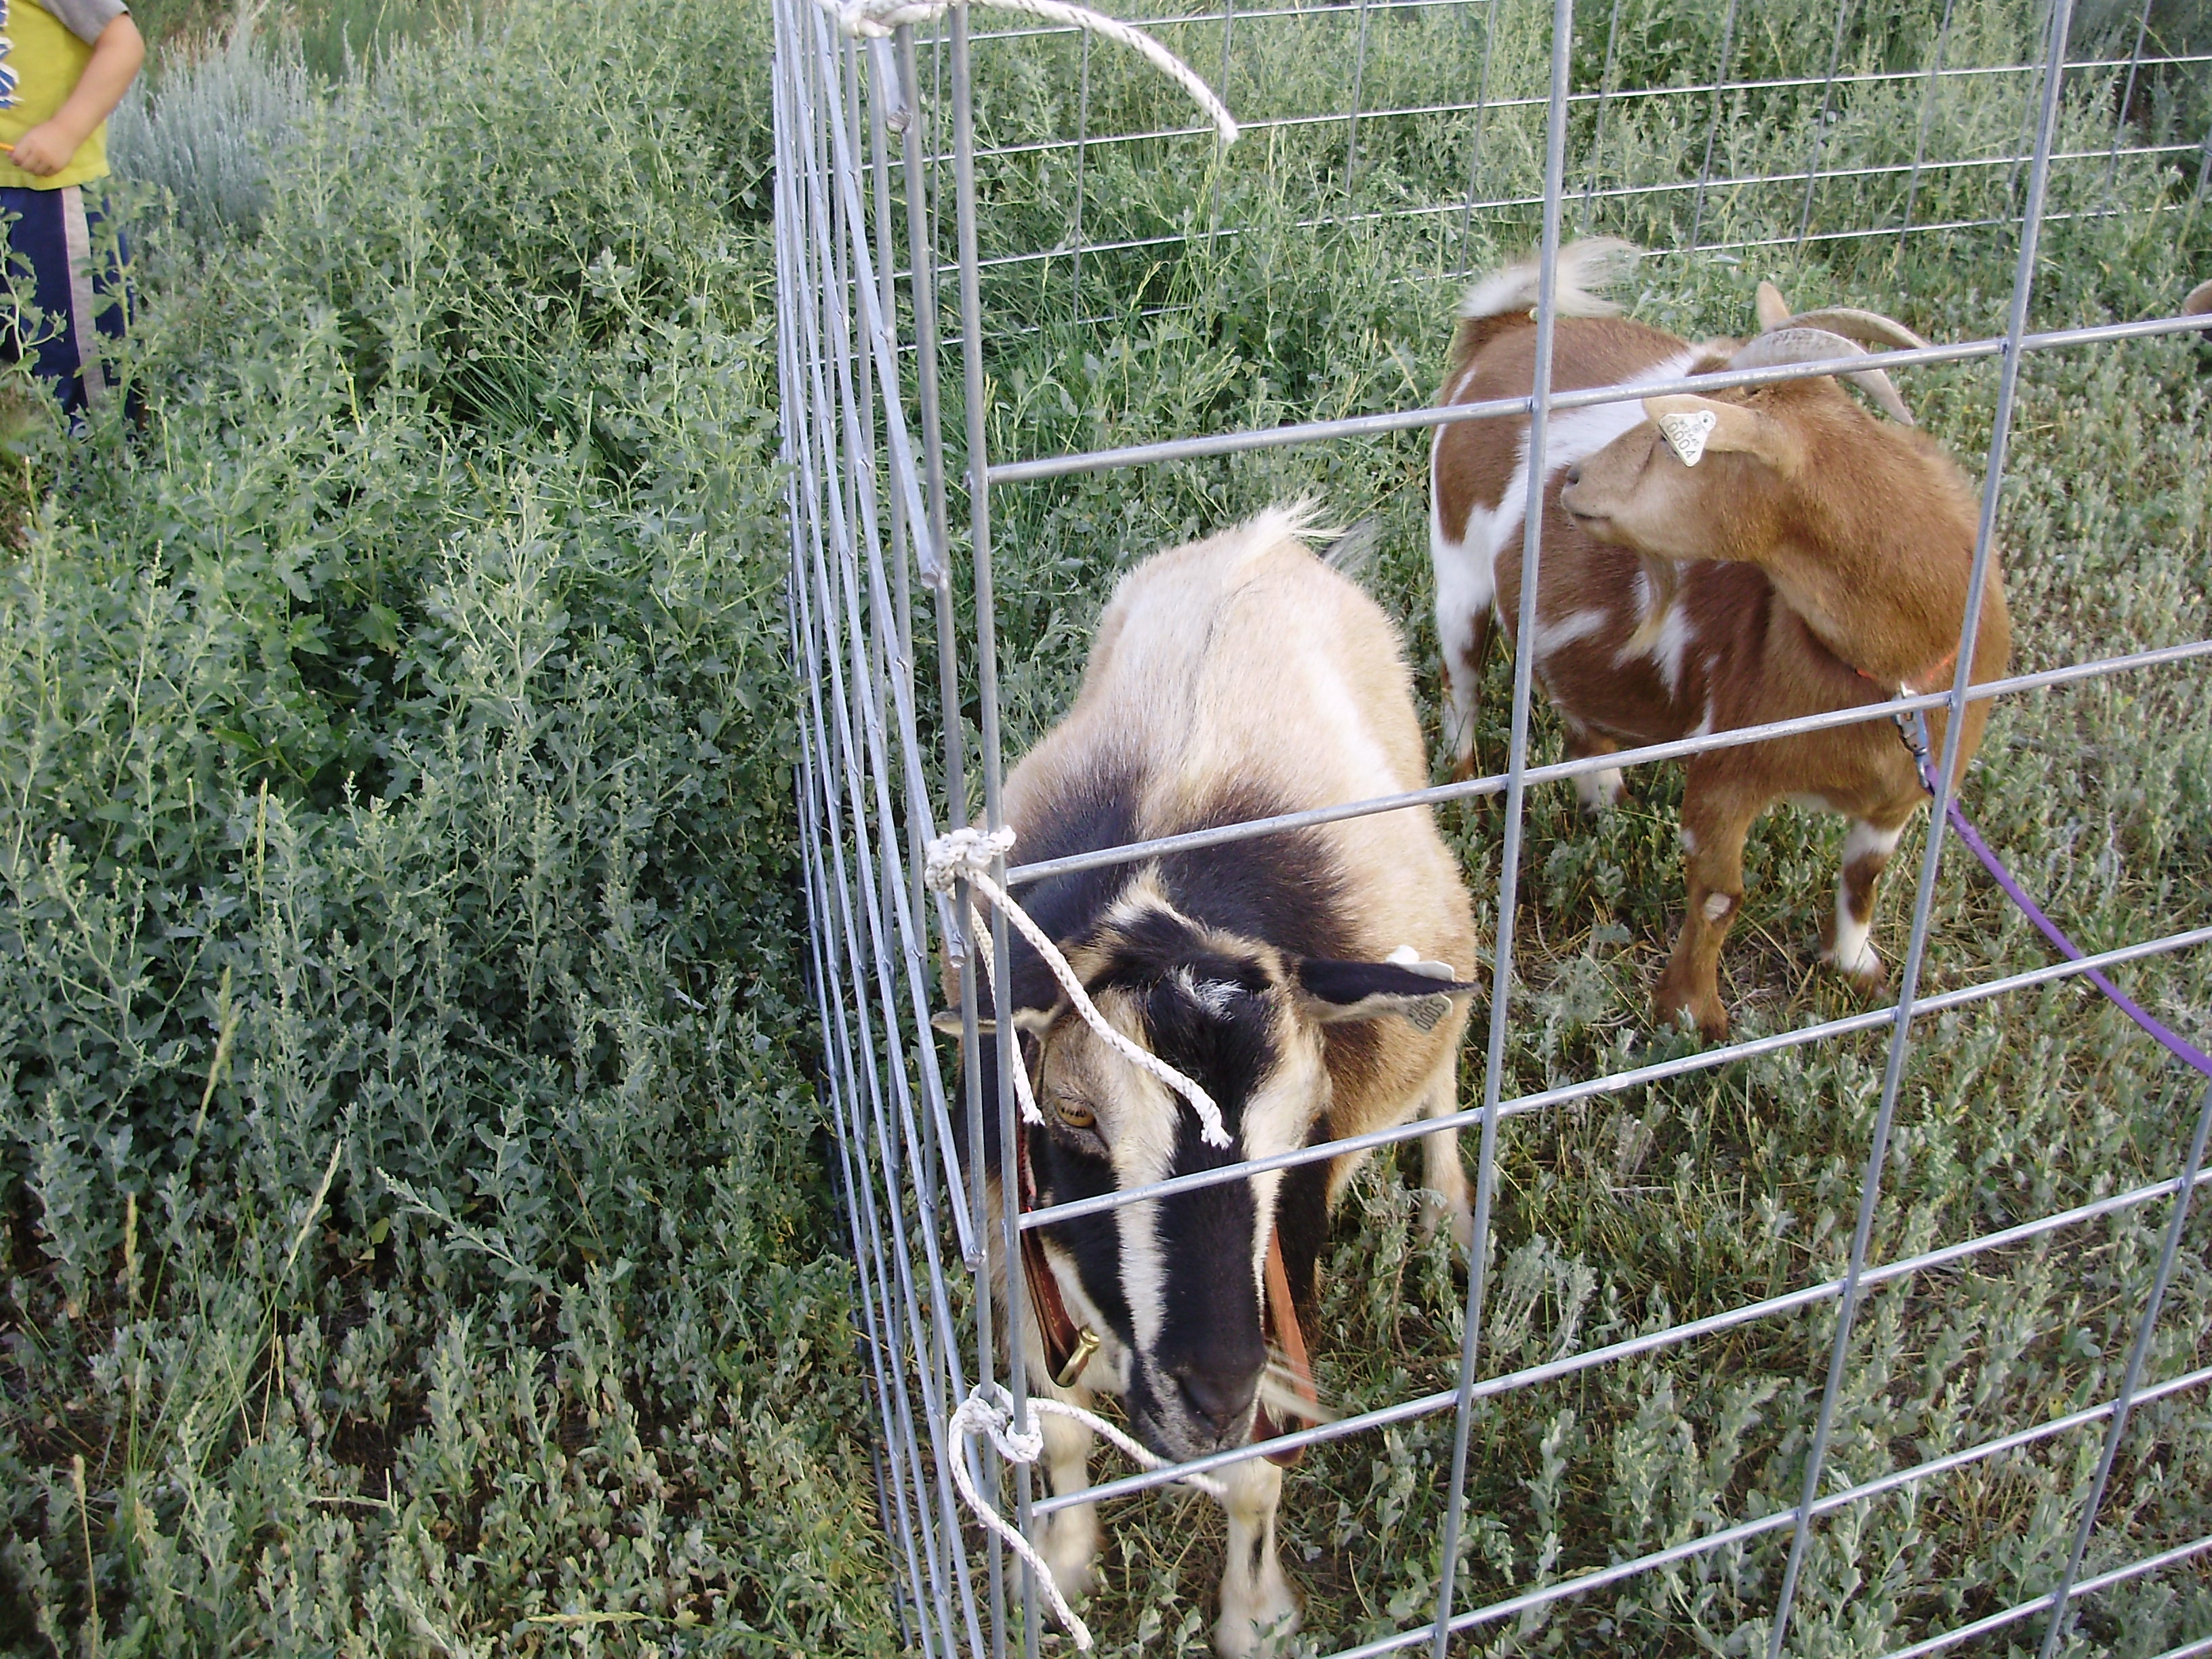 Portable Fence Panels For Goats Fences Ideas intended for size 3264 X 2448